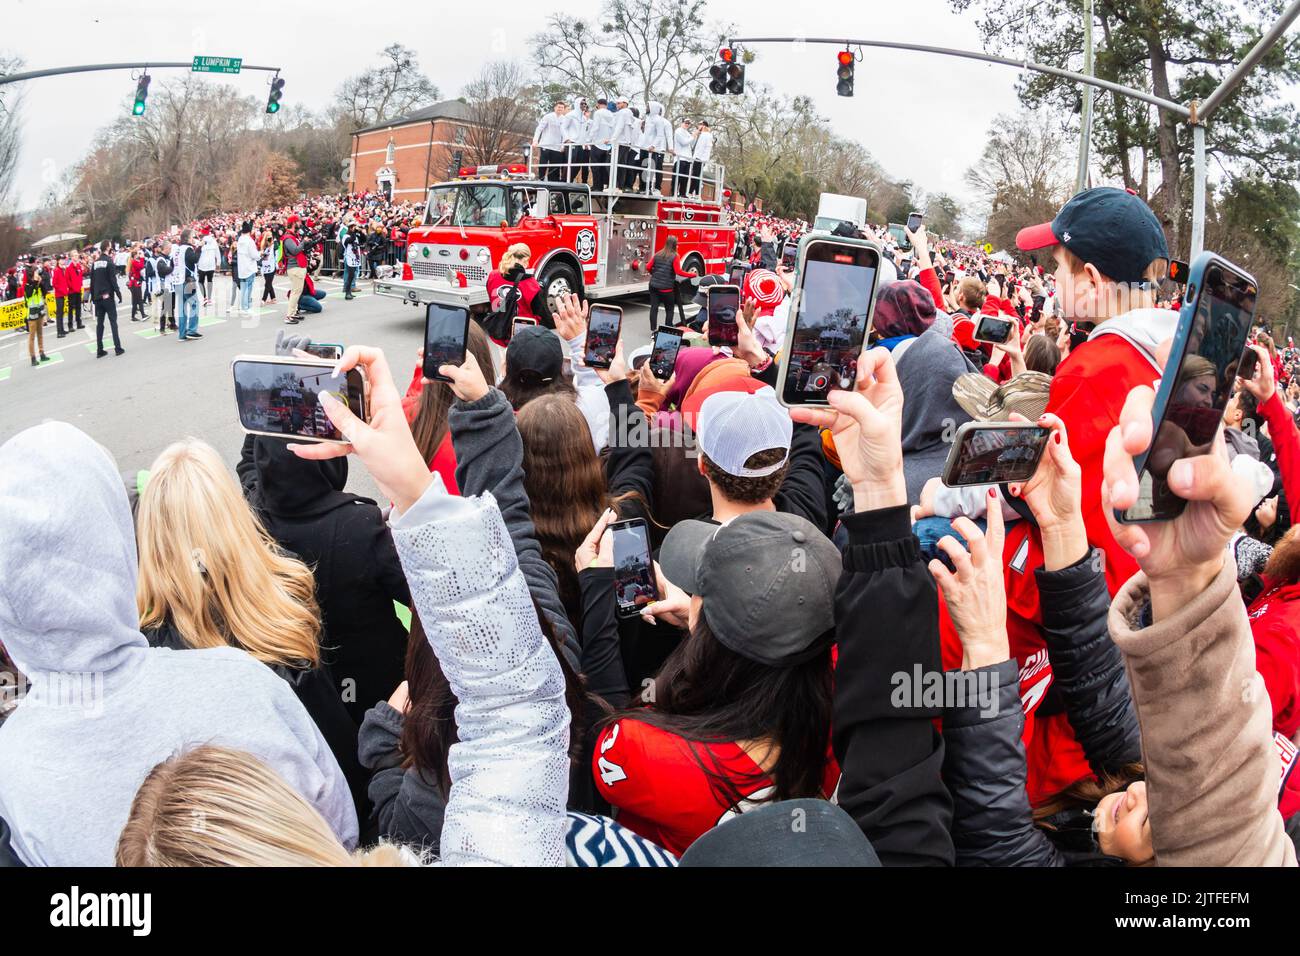 ATHENS, GA - JANUARY 15, 2022: Thousands of football fans cheer on the players as they celebrate Georgia's National Championship victory at a parade. Stock Photo